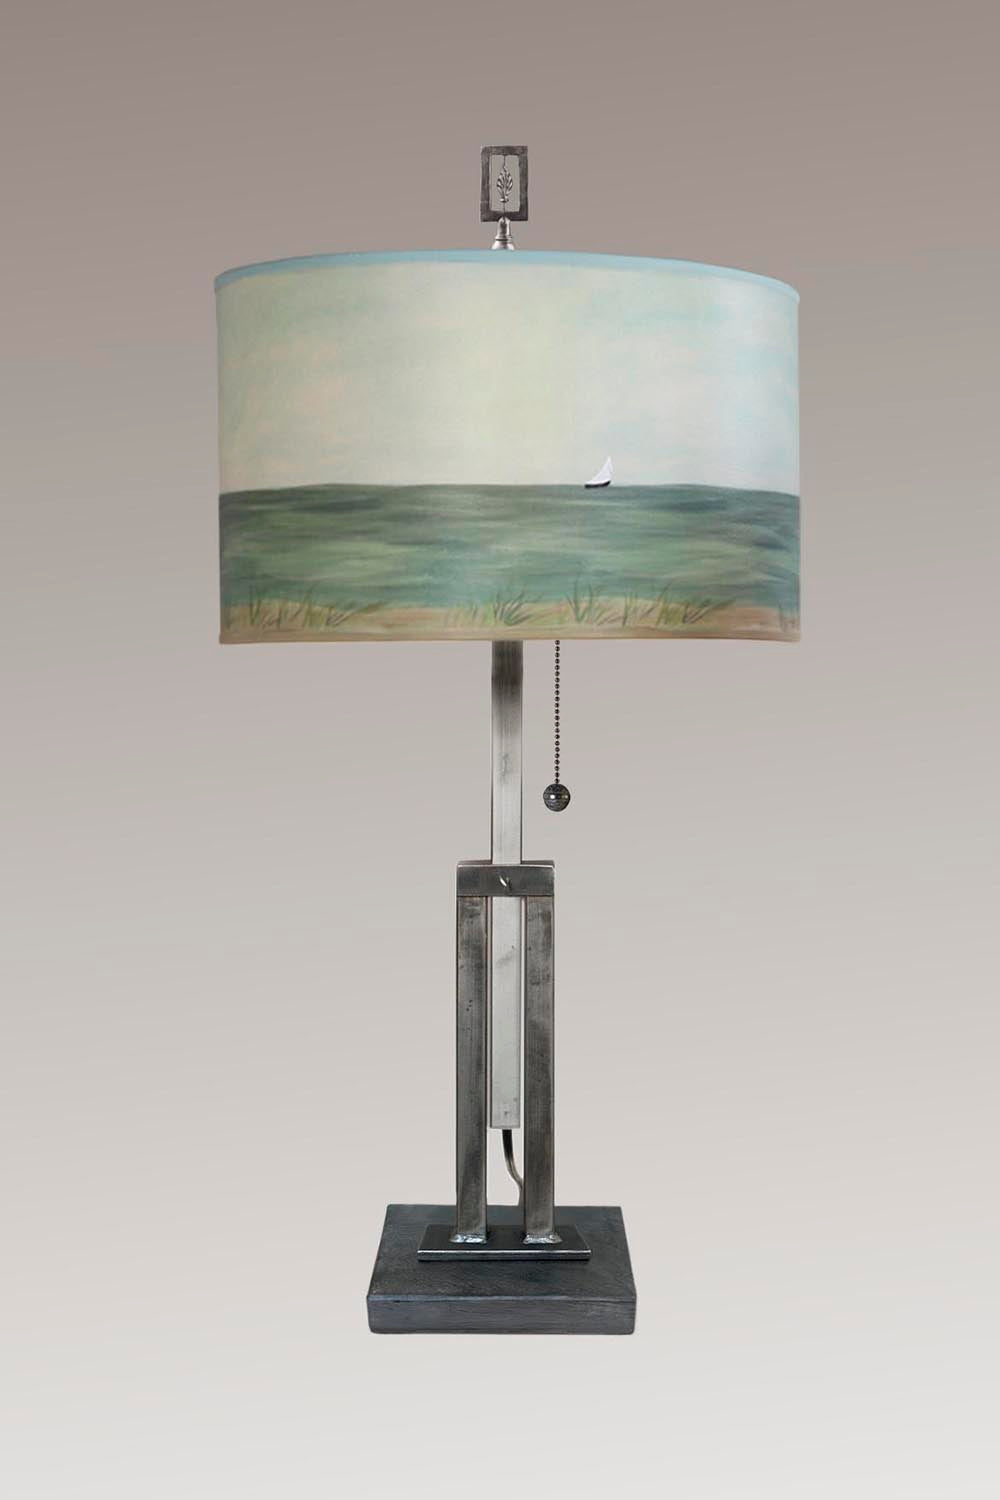 Janna Ugone & Co Table Lamps Adjustable-Height Steel Table Lamp with Large Drum Shade in Shore